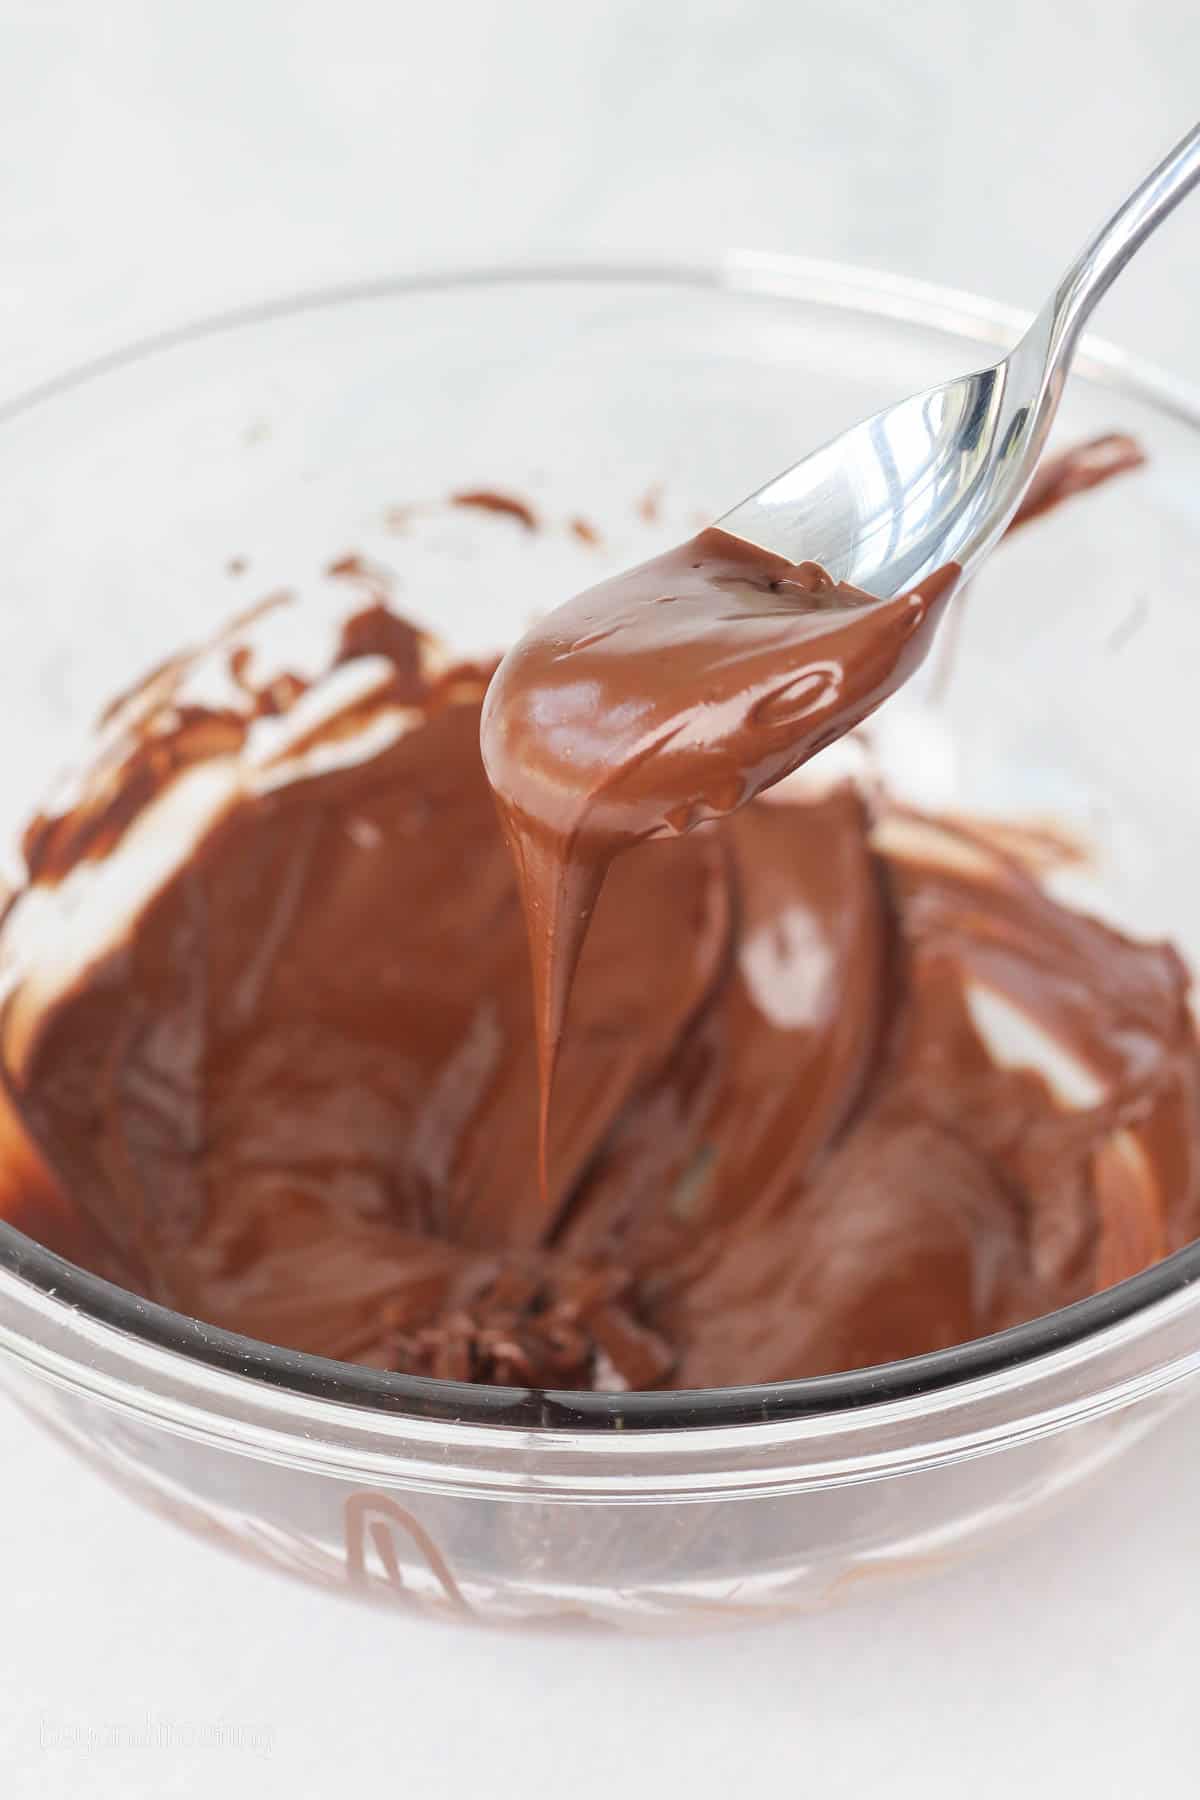 A spoon dipped into a bowl of melted chocolate chips.